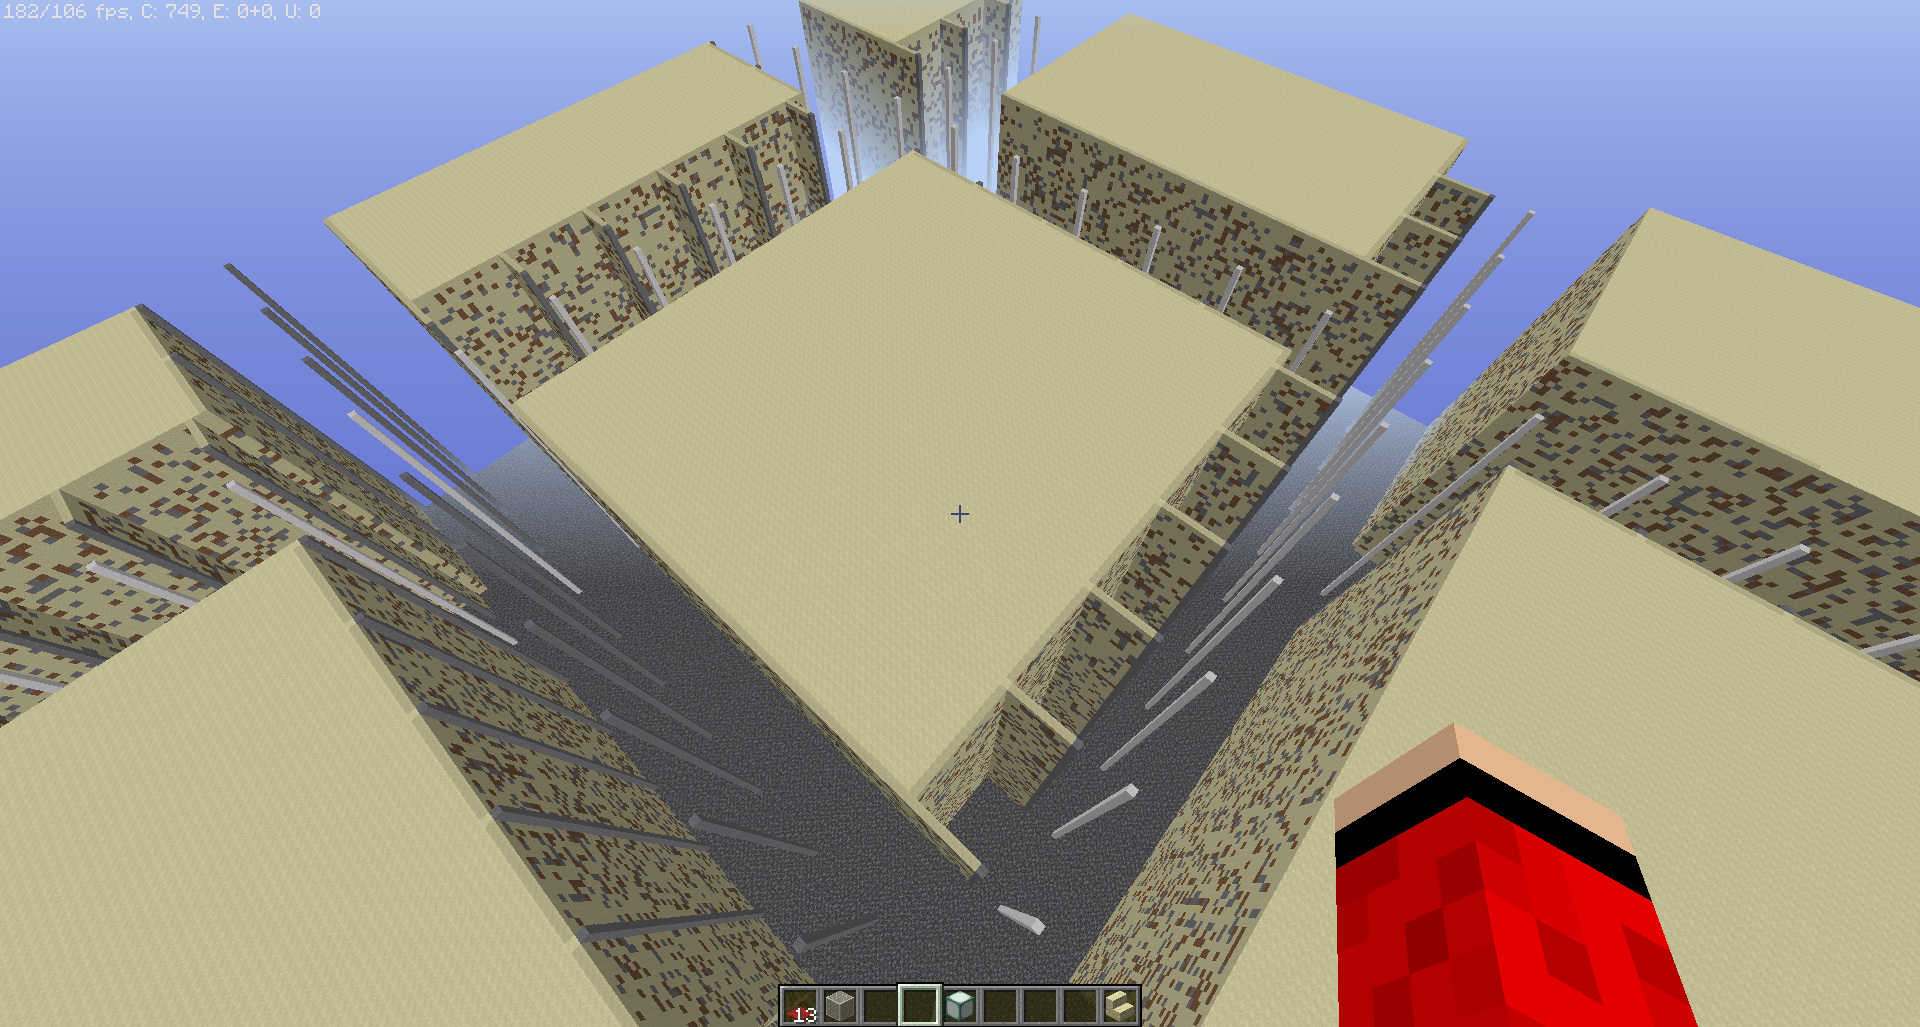 Minecraft Server - PlotSquared - 1.13.2 Vll. Does anyone know what you can do there - 1